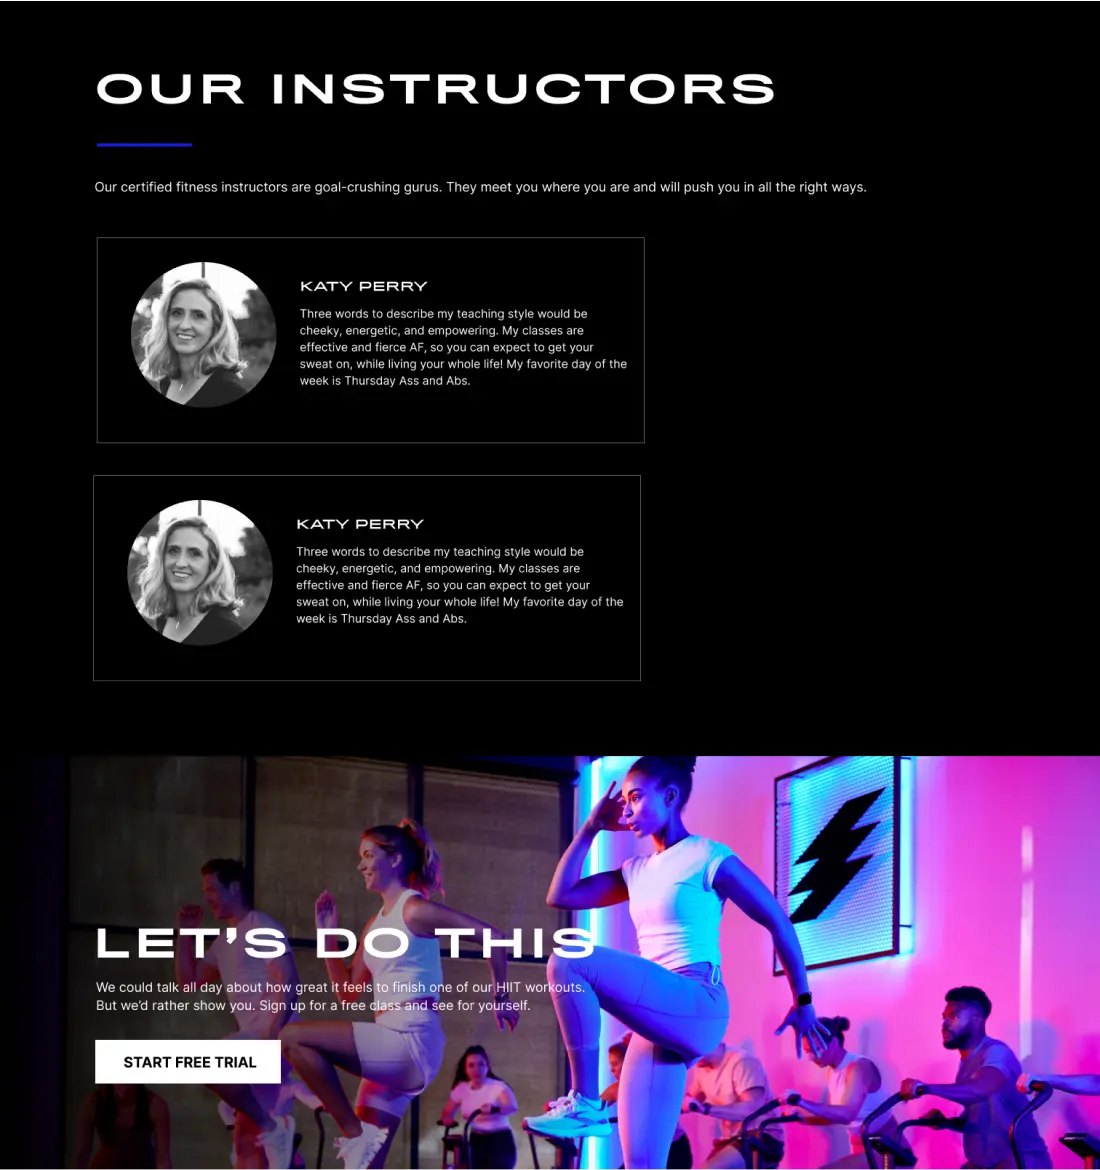 SUMHIIT Fitness Website Case Study: Expert Tips and Insights on High-Intensity Workouts